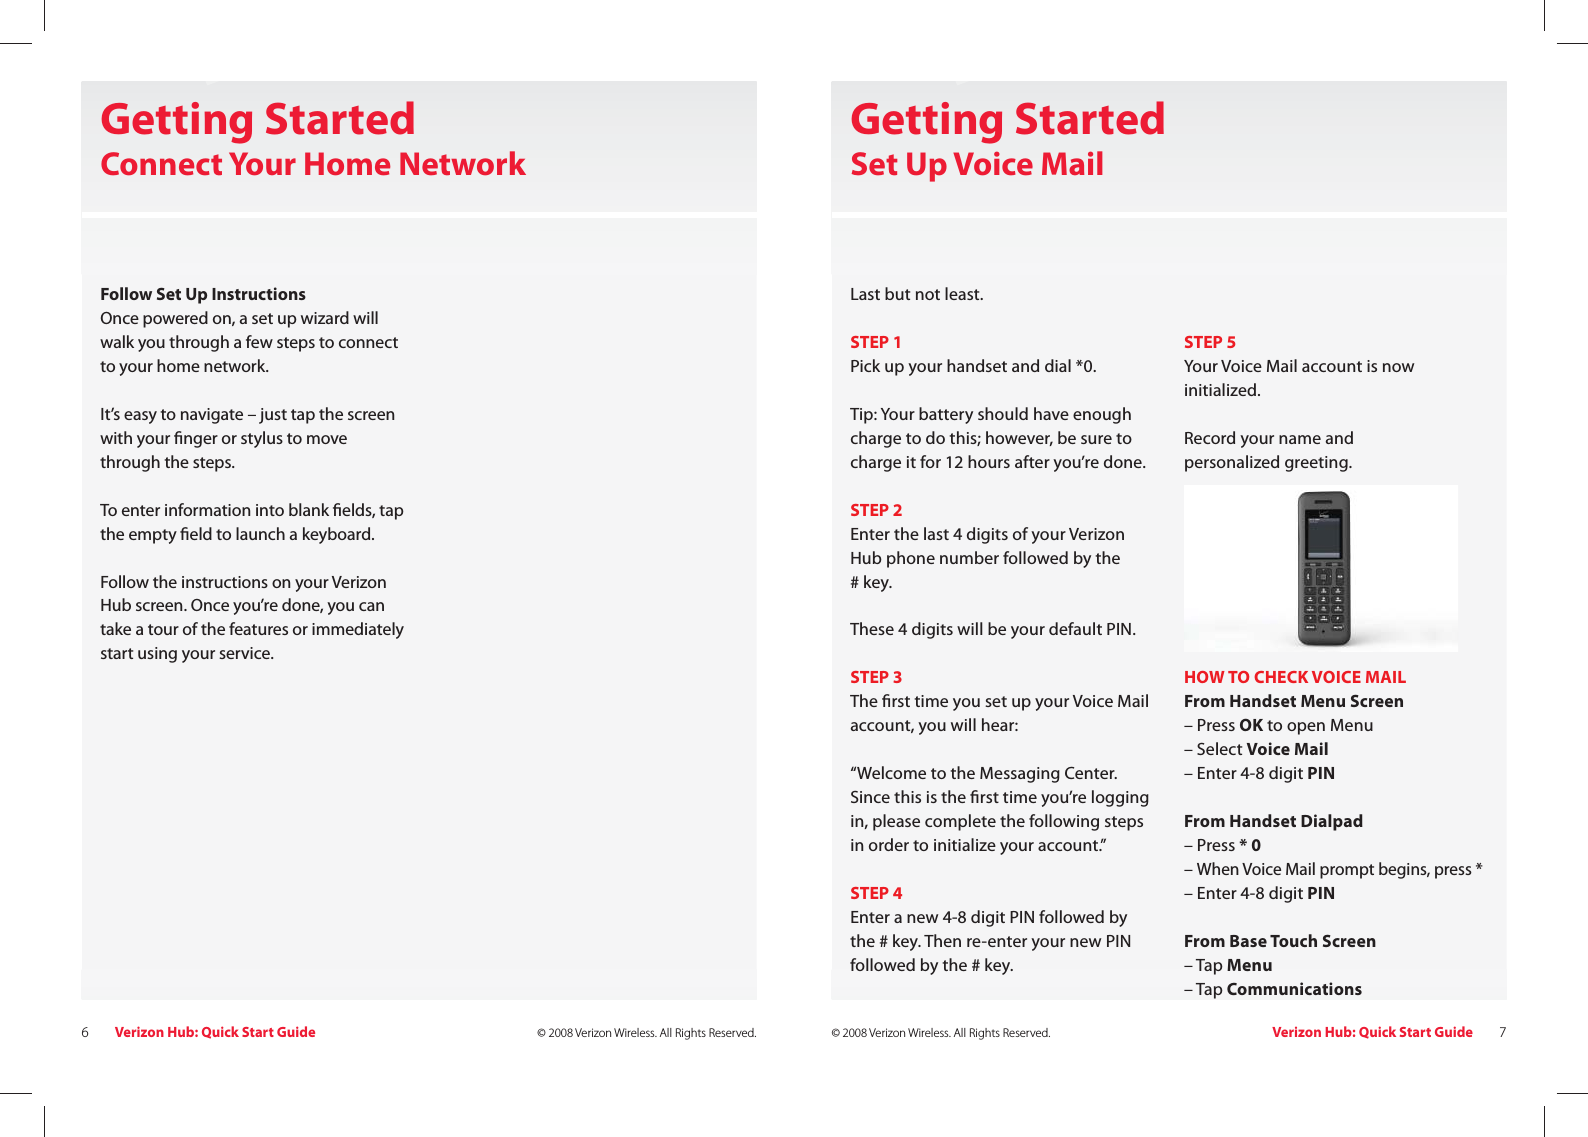 Verizon Hub: Quick Start Guide6© 2008 Verizon Wireless. All Rights Reserved. Verizon Hub: Quick Start Guide 7© 2008 Verizon Wireless. All Rights Reserved.Getting StartedConnect Your Home NetworkFollow Set Up InstructionsOnce powered on, a set up wizard will walk you through a few steps to connect to your home network.It’s easy to navigate – just tap the screen with your  nger or stylus to move through the steps.To enter information into blank  elds, tap the empty  eld to launch a keyboard.Follow the instructions on your Verizon Hub screen. Once you’re done, you can take a tour of the features or immediately start using your service.Getting Started Set Up Voice MailLast but not least.STEP 1Pick up your handset and dial *0.Tip: Your battery should have enough charge to do this; however, be sure to charge it for 12 hours after you’re done.STEP 2Enter the last 4 digits of your Verizon Hub phone number followed by the # key.These 4 digits will be your default PIN. STEP 3The  rst time you set up your Voice Mail account, you will hear: “Welcome to the Messaging Center. Since this is the  rst time you’re logging in, please complete the following steps in order to initialize your account.”STEP 4Enter a new 4-8 digit PIN followed by the # key. Then re-enter your new PIN followed by the # key.STEP 5Your Voice Mail account is now initialized.Record your name and personalized greeting.HOW TO CHECK VOICE MAILFrom Handset Menu Screen– Press OK to open Menu– Select Voice Mail – Enter 4-8 digit PINFrom Handset Dialpad– Press * 0– When Voice Mail prompt begins, press *– Enter 4-8 digit PINFrom Base Touch Screen– Tap Menu– Tap Communications 